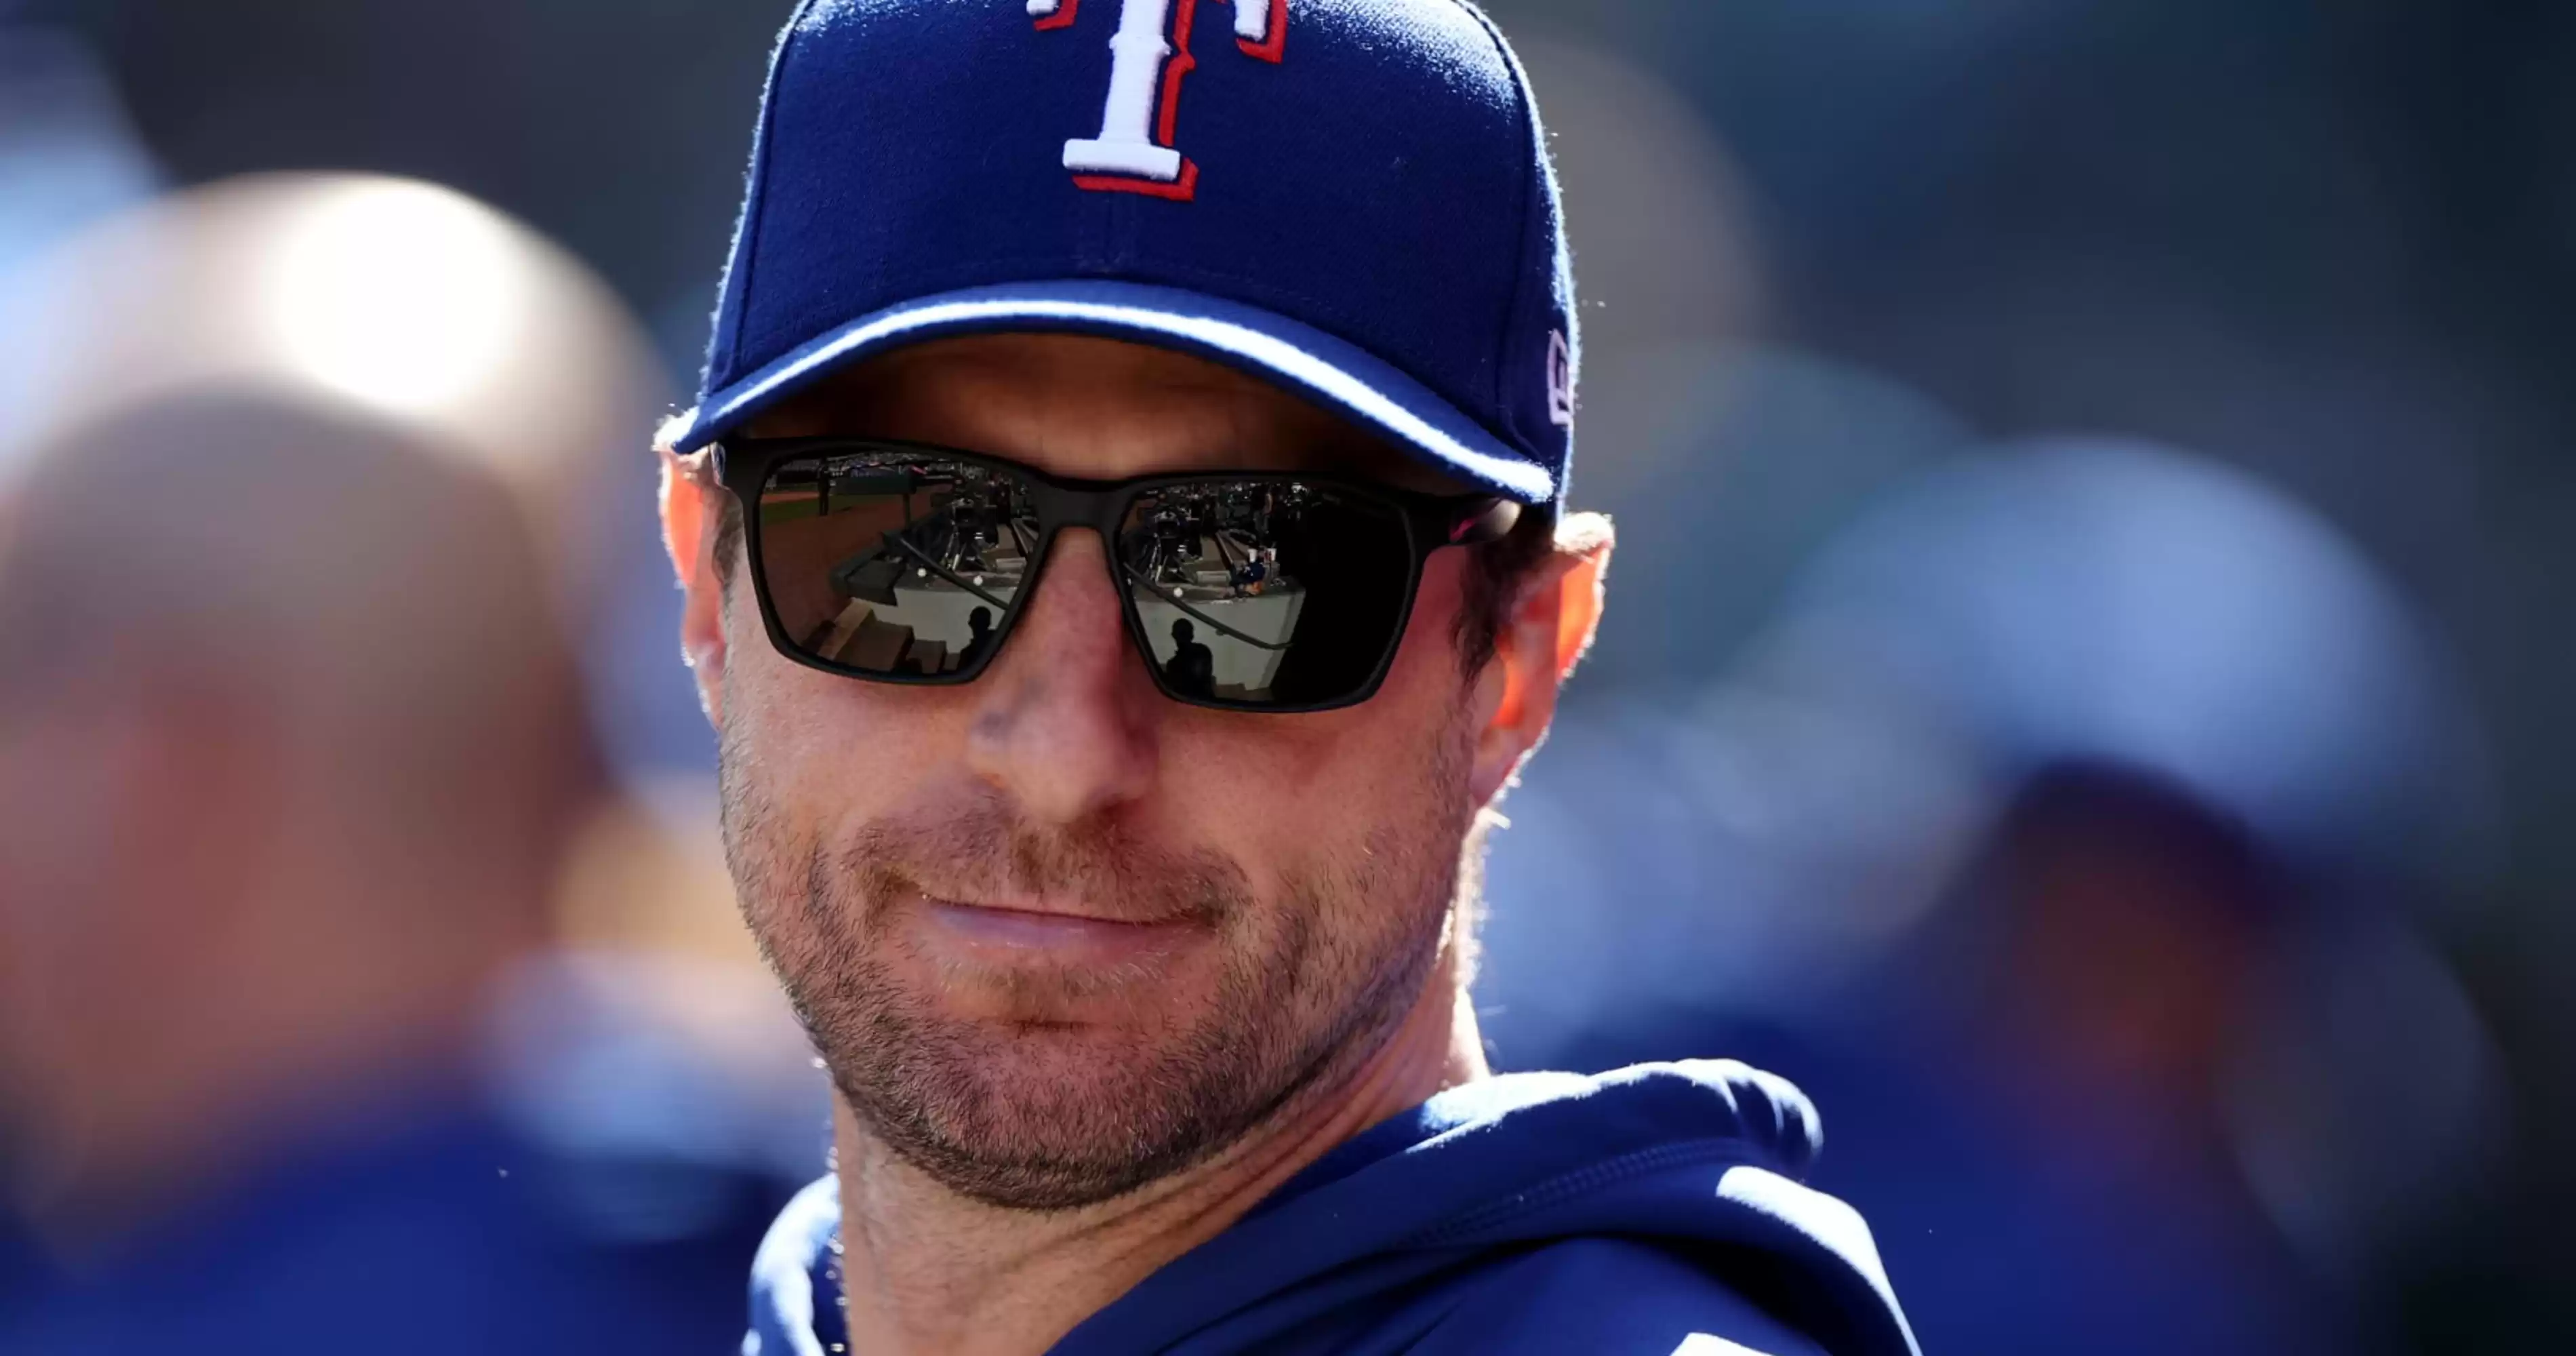 Max Scherzer Added to Rangers Roster for MLB ALCS vs. Astros Amid Injury Rehab